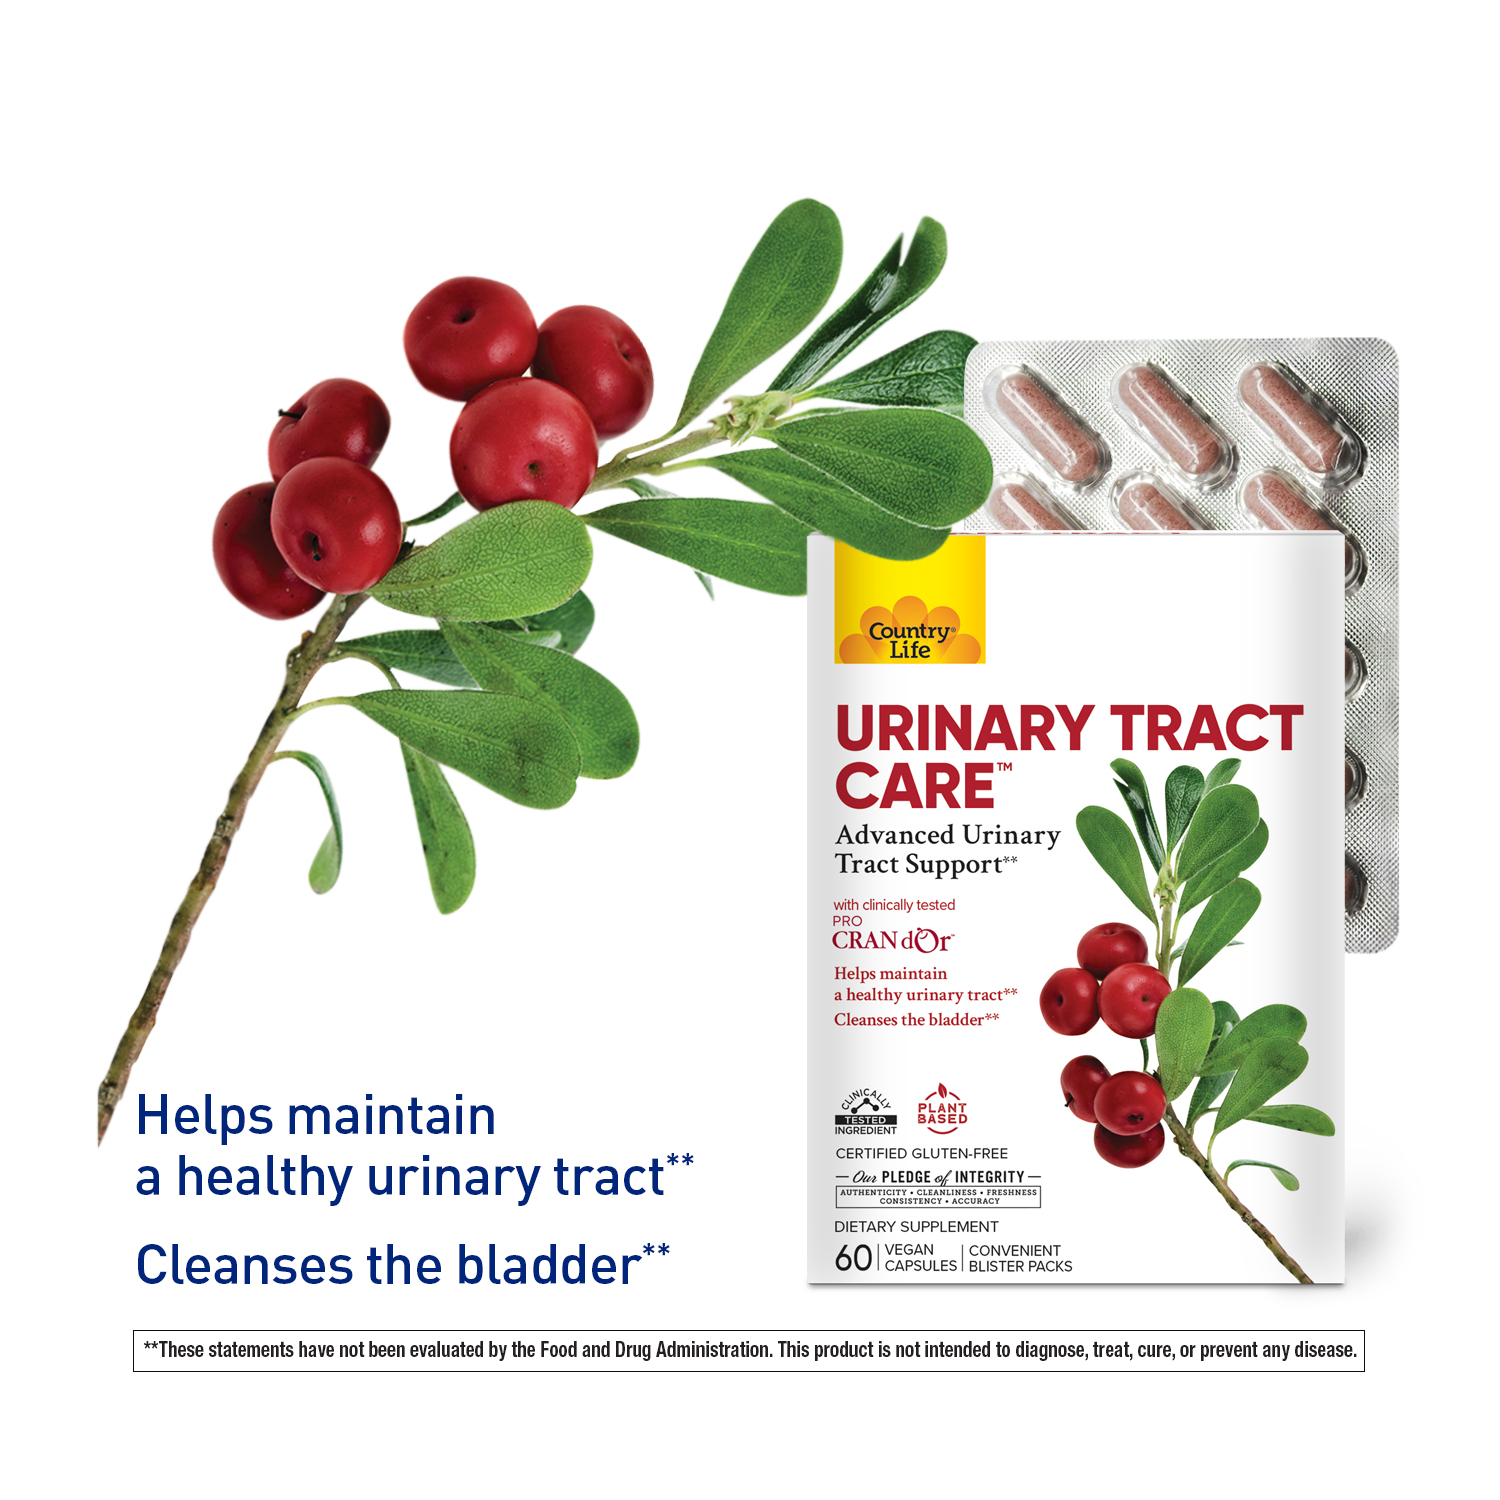 Urinary Tract Care™